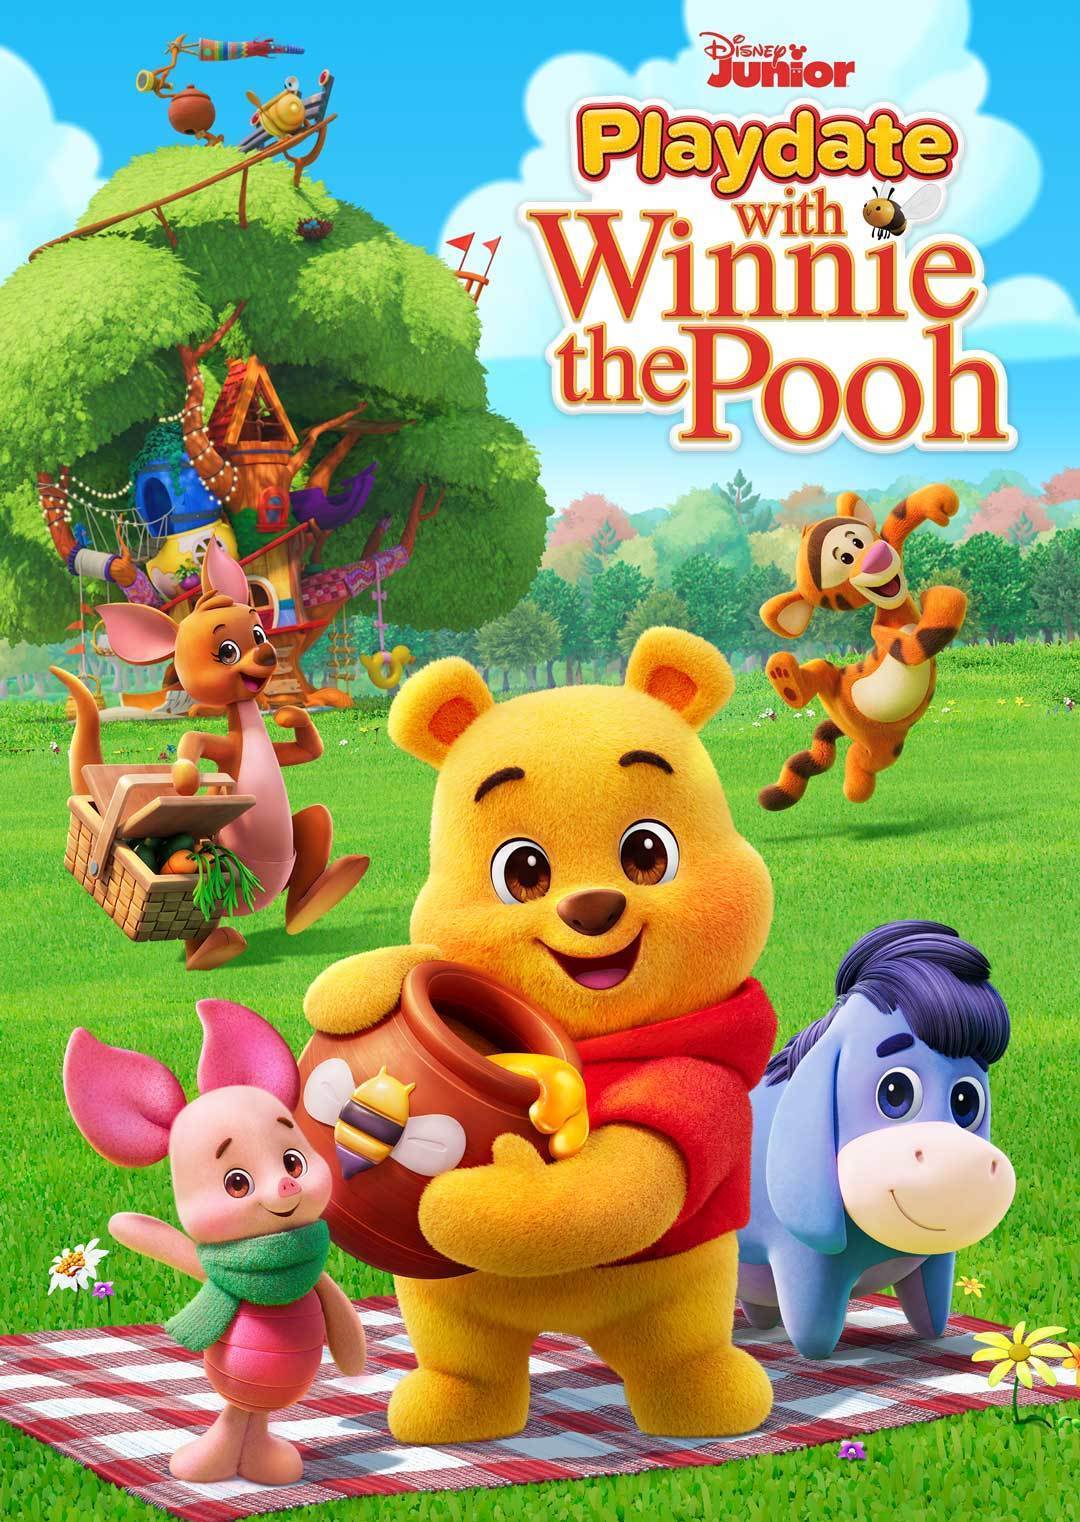 Marketing poster for Playdate with Winnie The Pooh streaming on Disney+